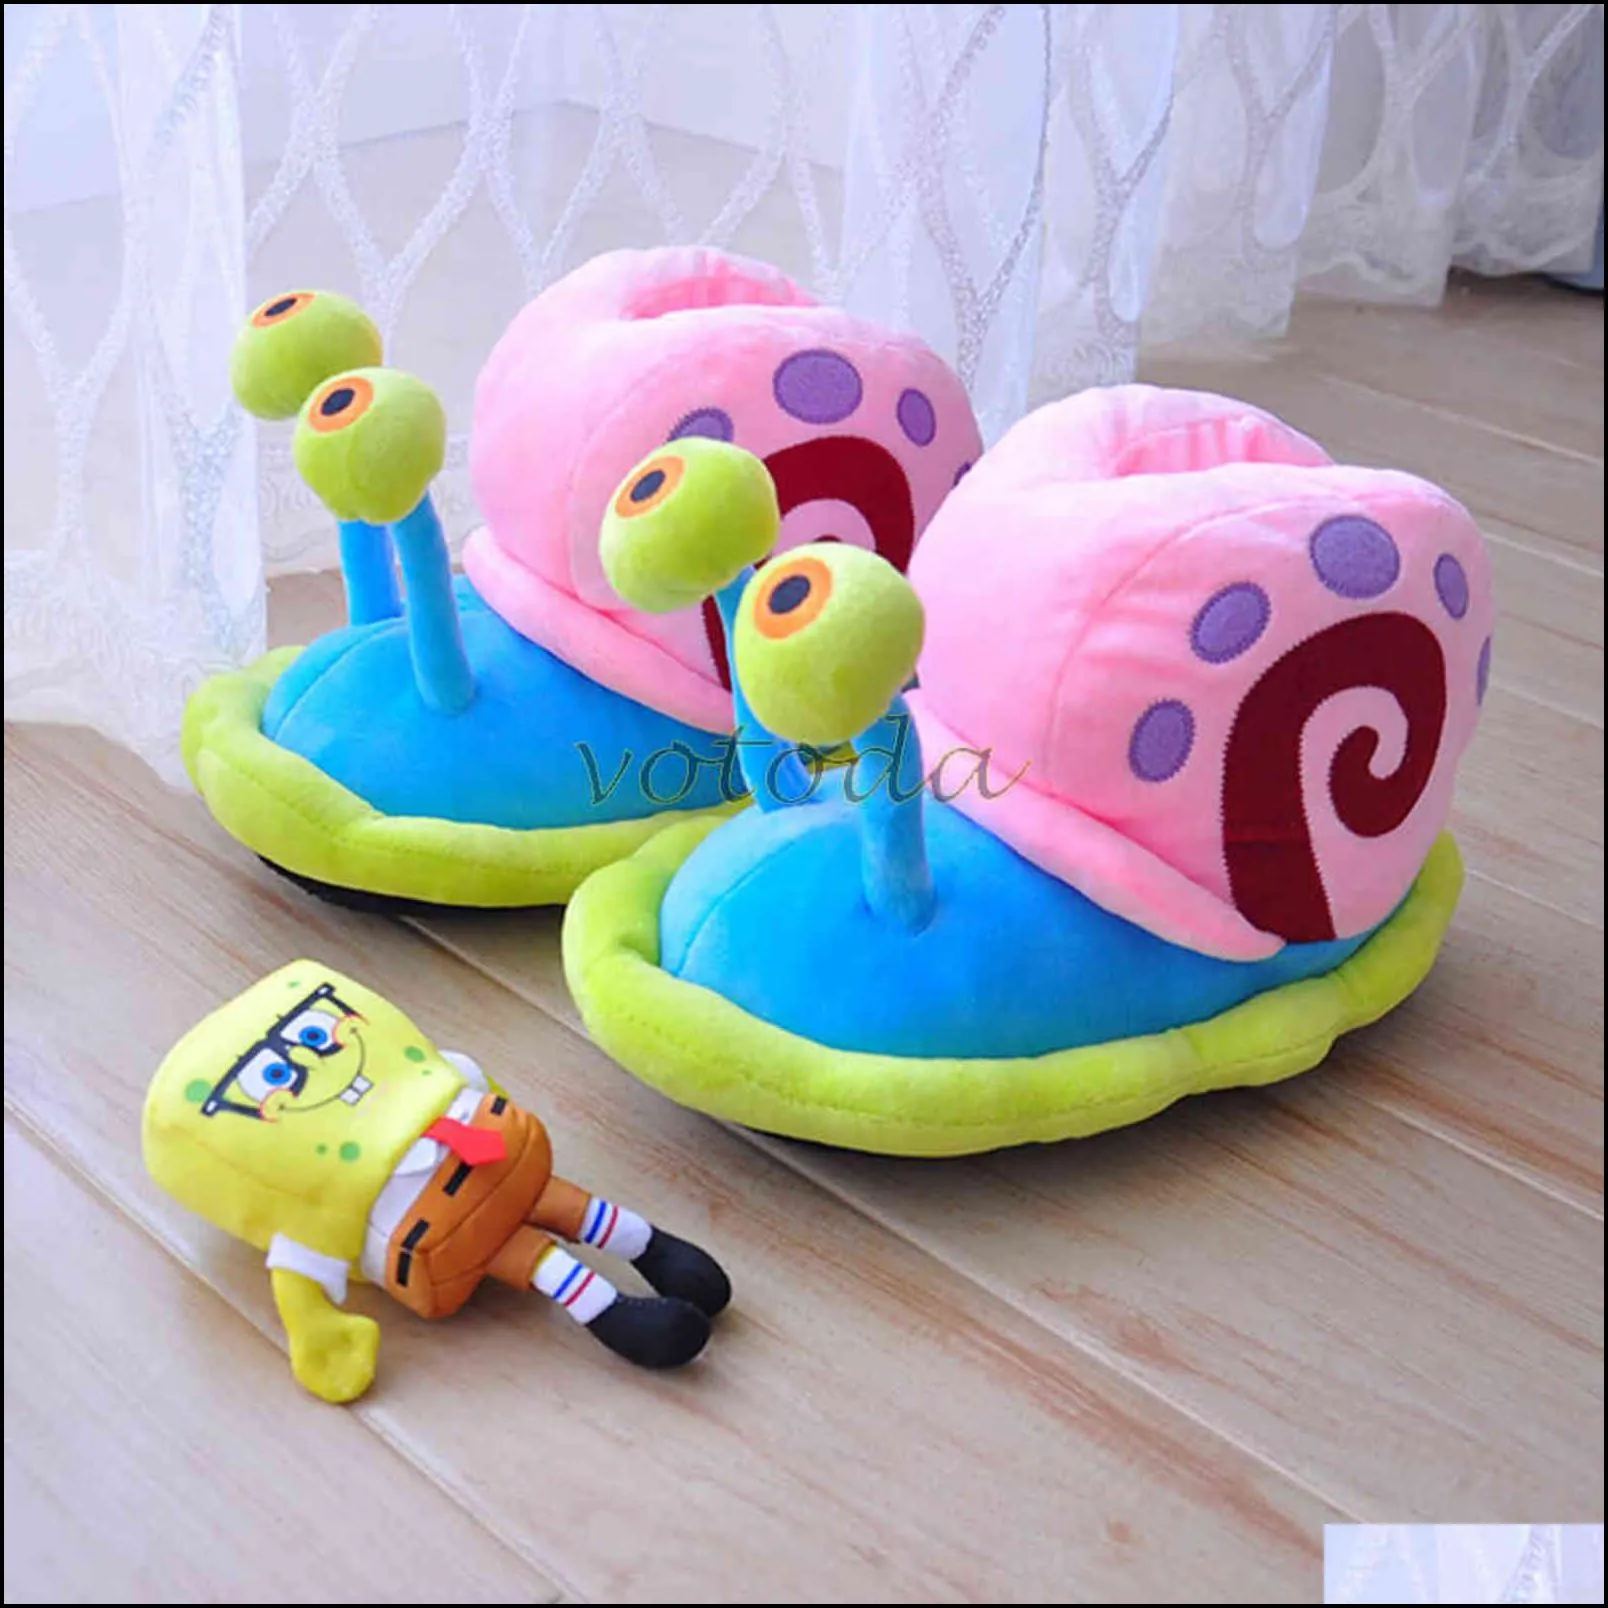 slippers home plush shoes flat slides cotton slipper flop winter cartoon women funny cute snail indoor cozy furry warm